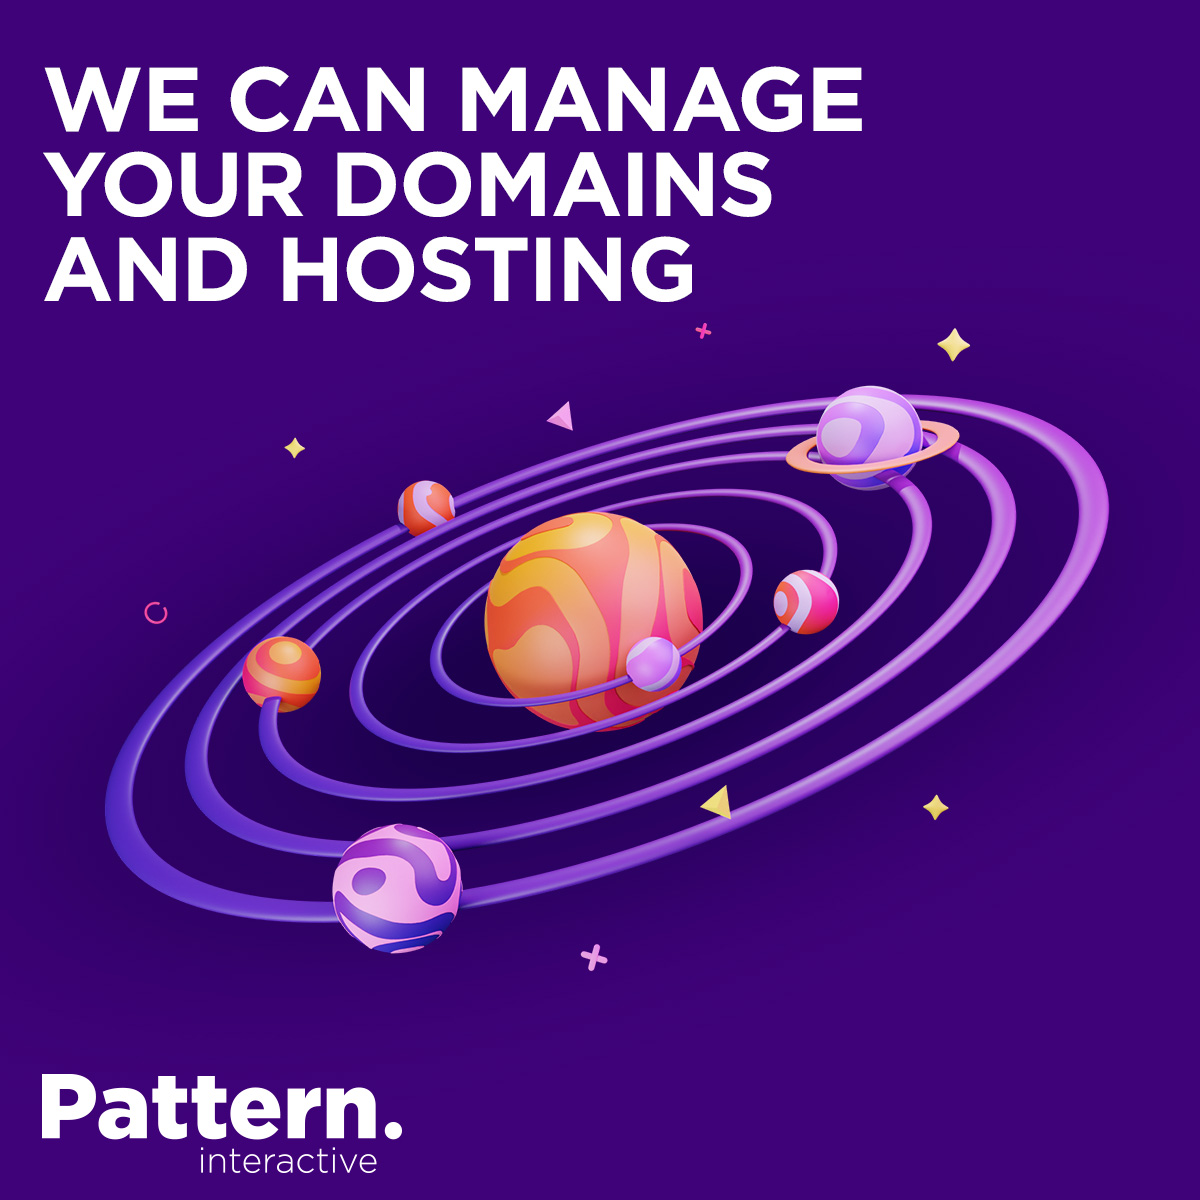 🛠️ Focus on your business and let us manage your domains and hosting. We provide dedicated support to keep your site running smoothly, so you can concentrate on what matters. #DomainManagement #HostingServices